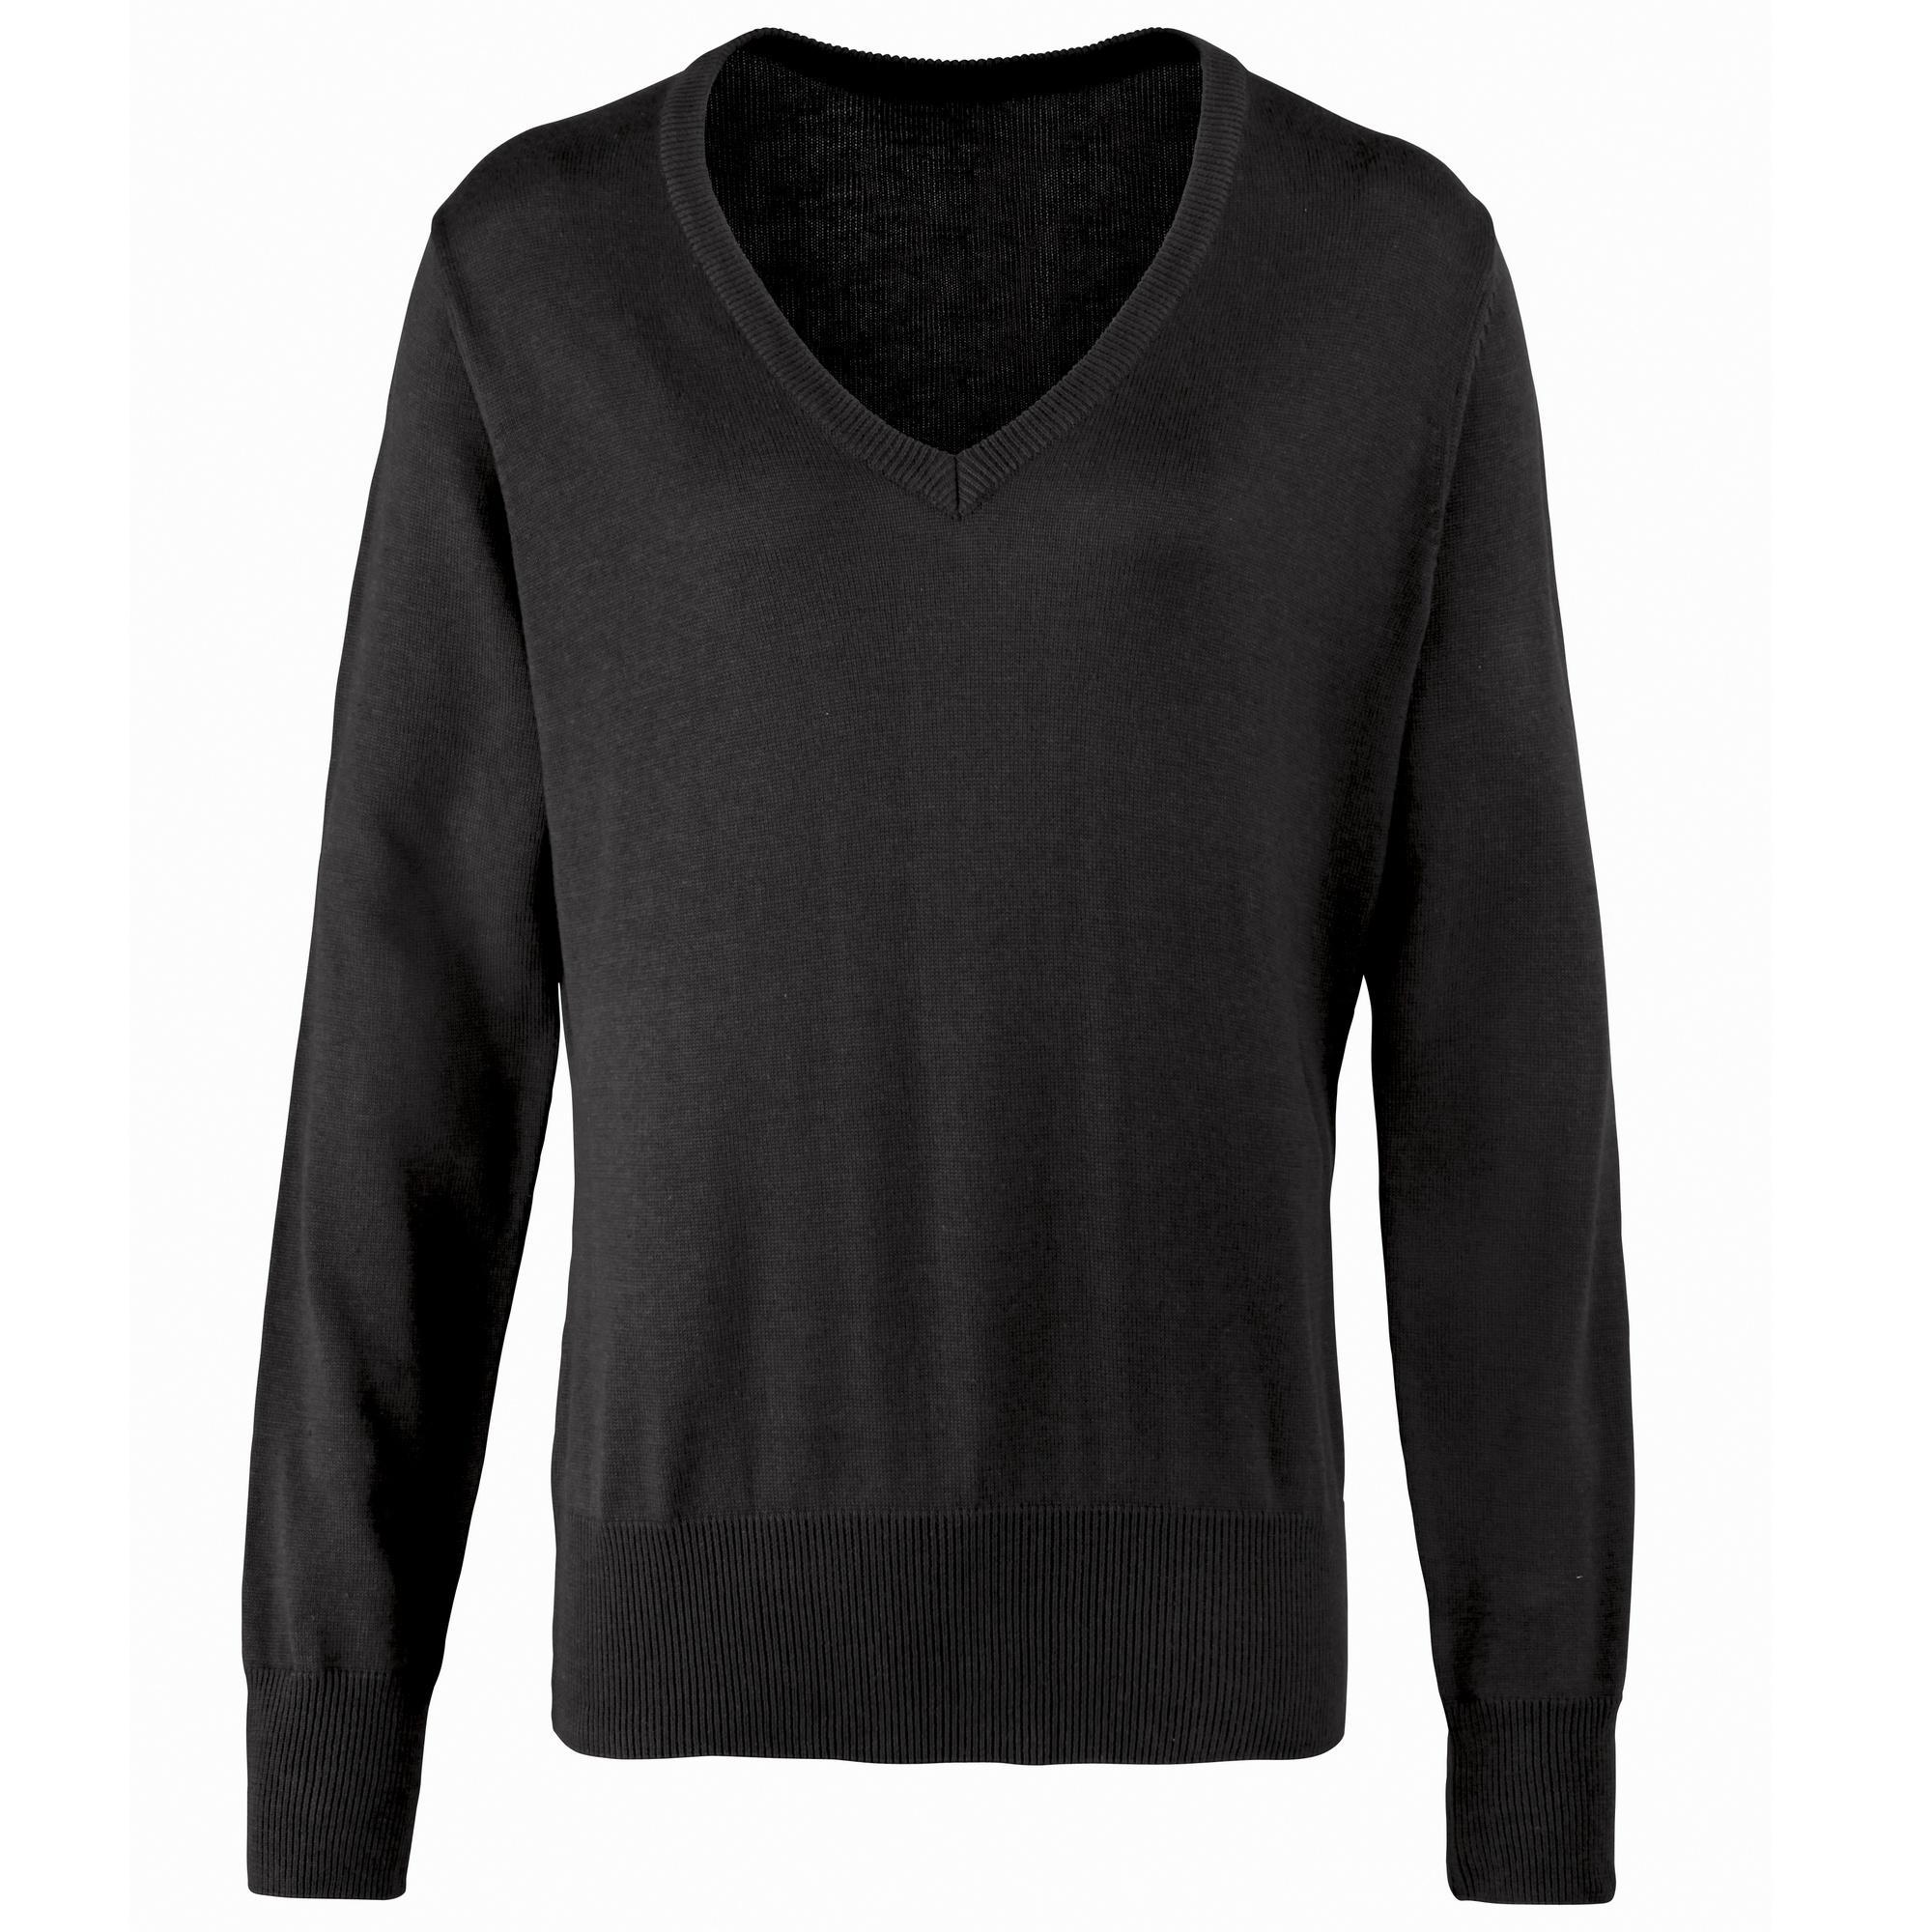 Premier Womens/Ladies V-Neck Knitted Sweater / Top (Black) (22)